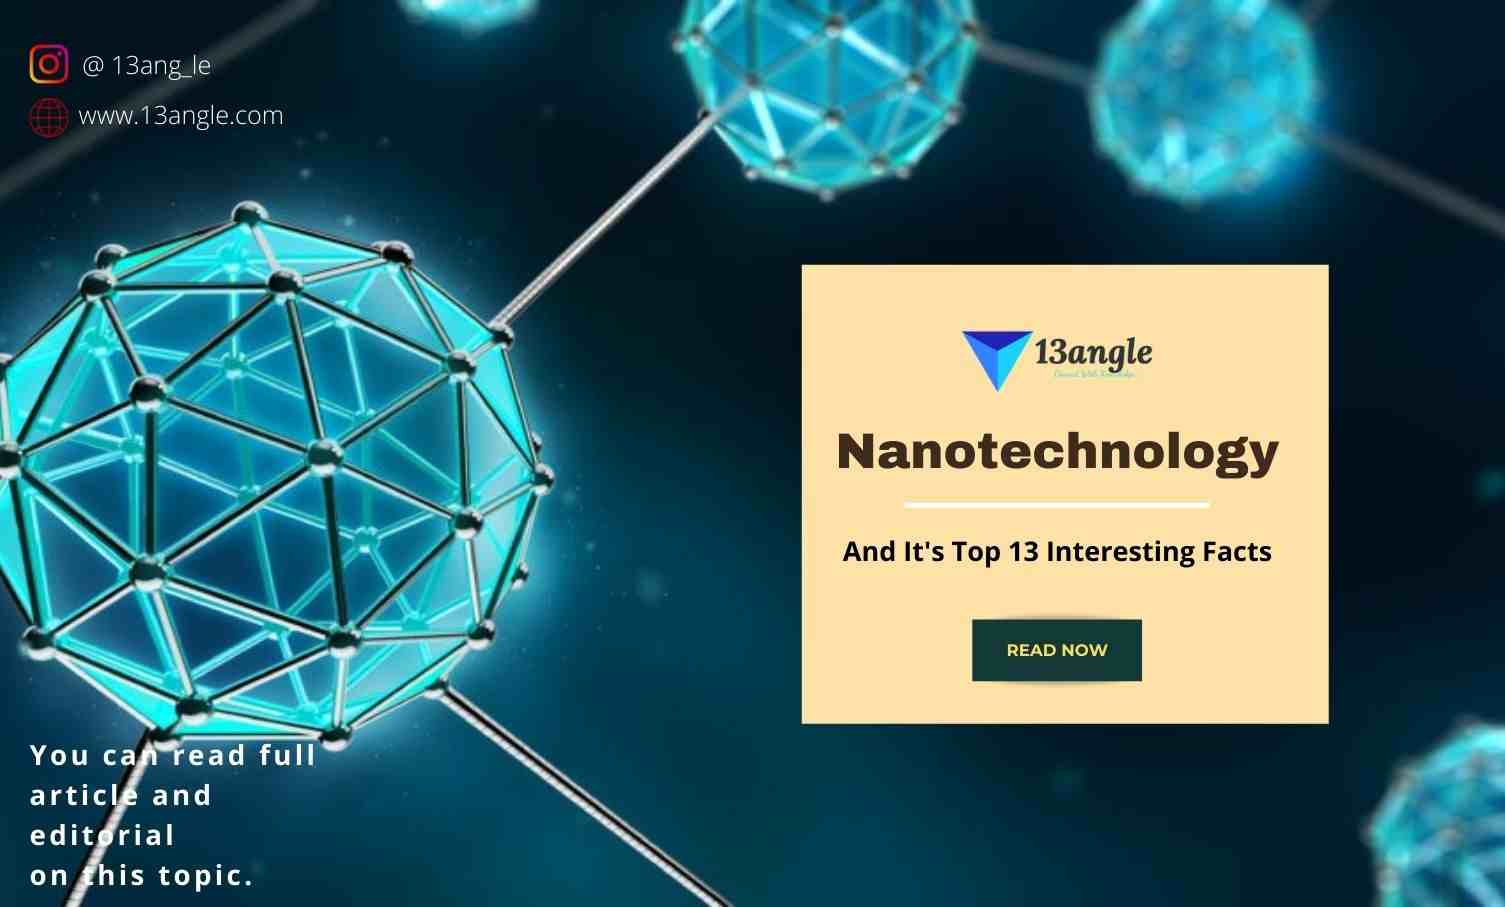 Nanotechnology And It's Top 13 Interesting Facts- 13angle.com